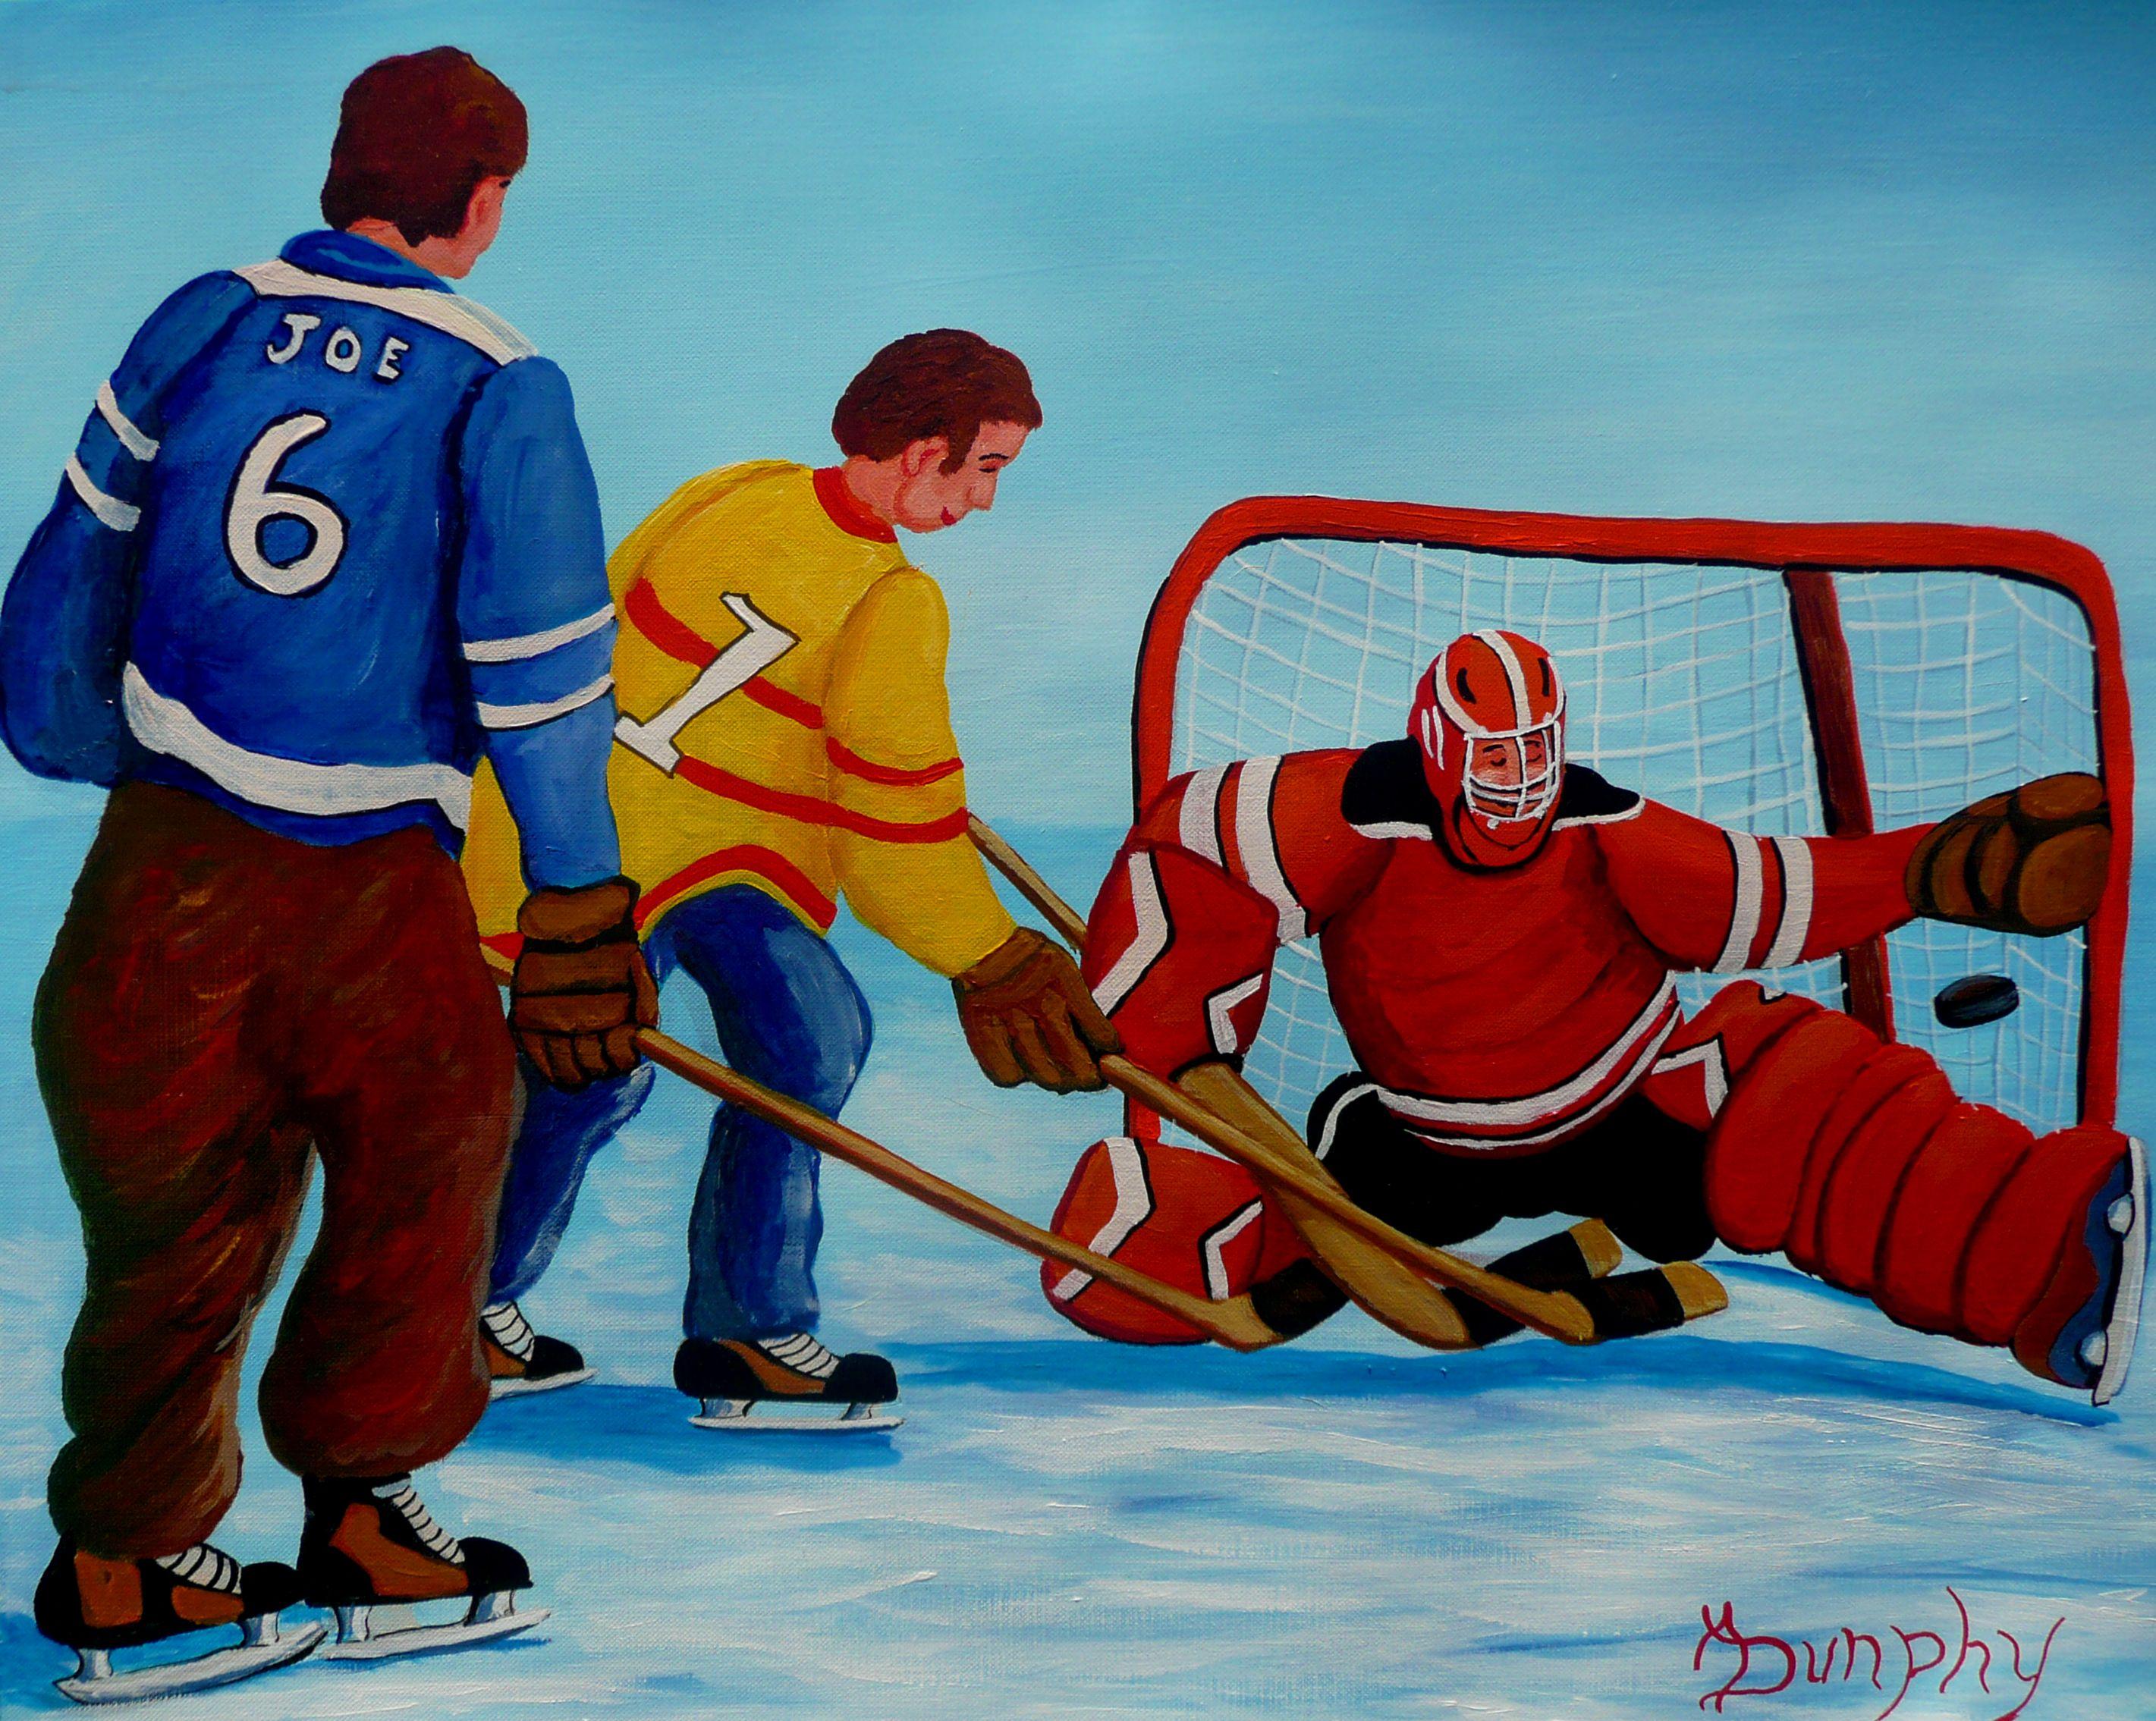 During a pick up game between friends, two players rush the goal in hopes of getting the puck past the goalie. Will he make the save?  This sports painting has been created using professional grade acrylics on 118 lb archival quality canvas paper.